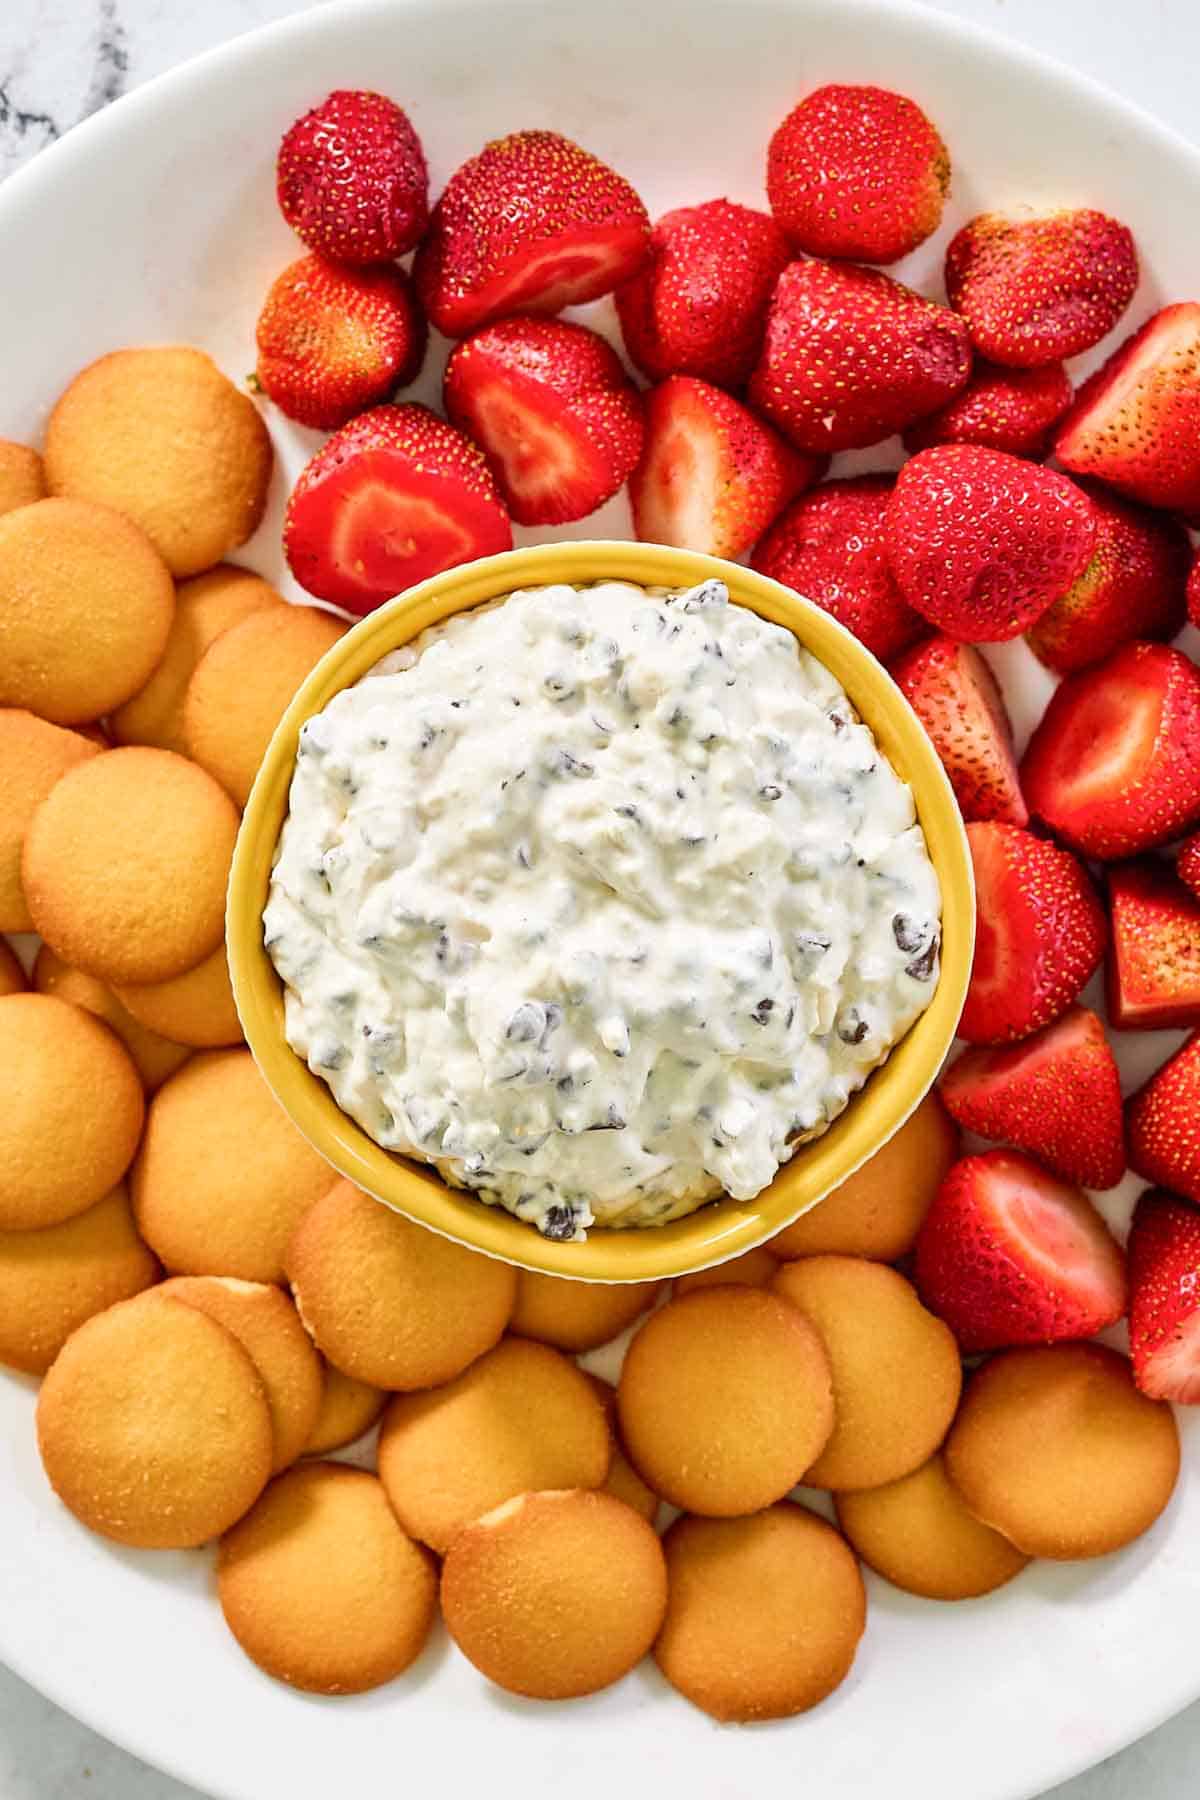 Booty dip, vanilla wafers, and strawberries on a platter.